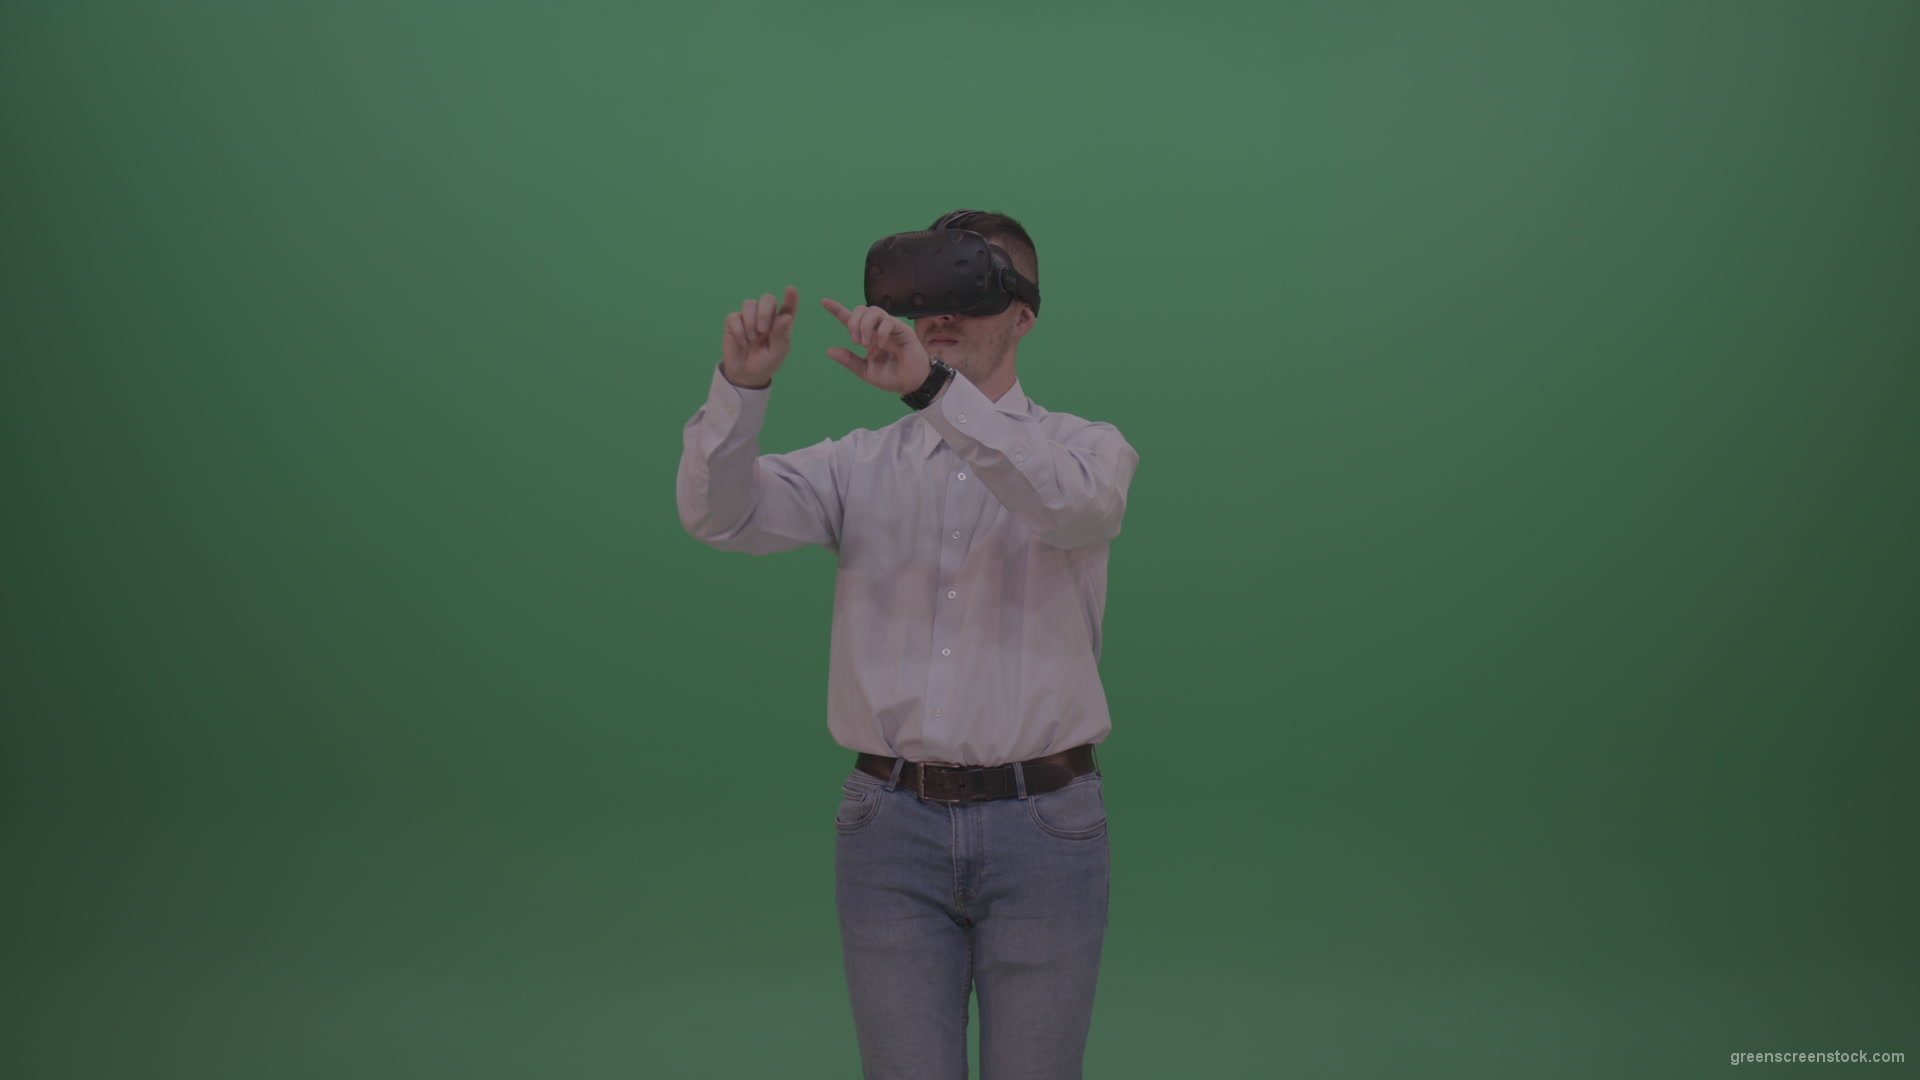 Young_Handsome_Man_With_Black_Hair_Wearing_White_Shirt_Using_Virtual_Glasses_Clicking_Touch_Pad_On_Green_Screen_Background_Wall_008 Green Screen Stock